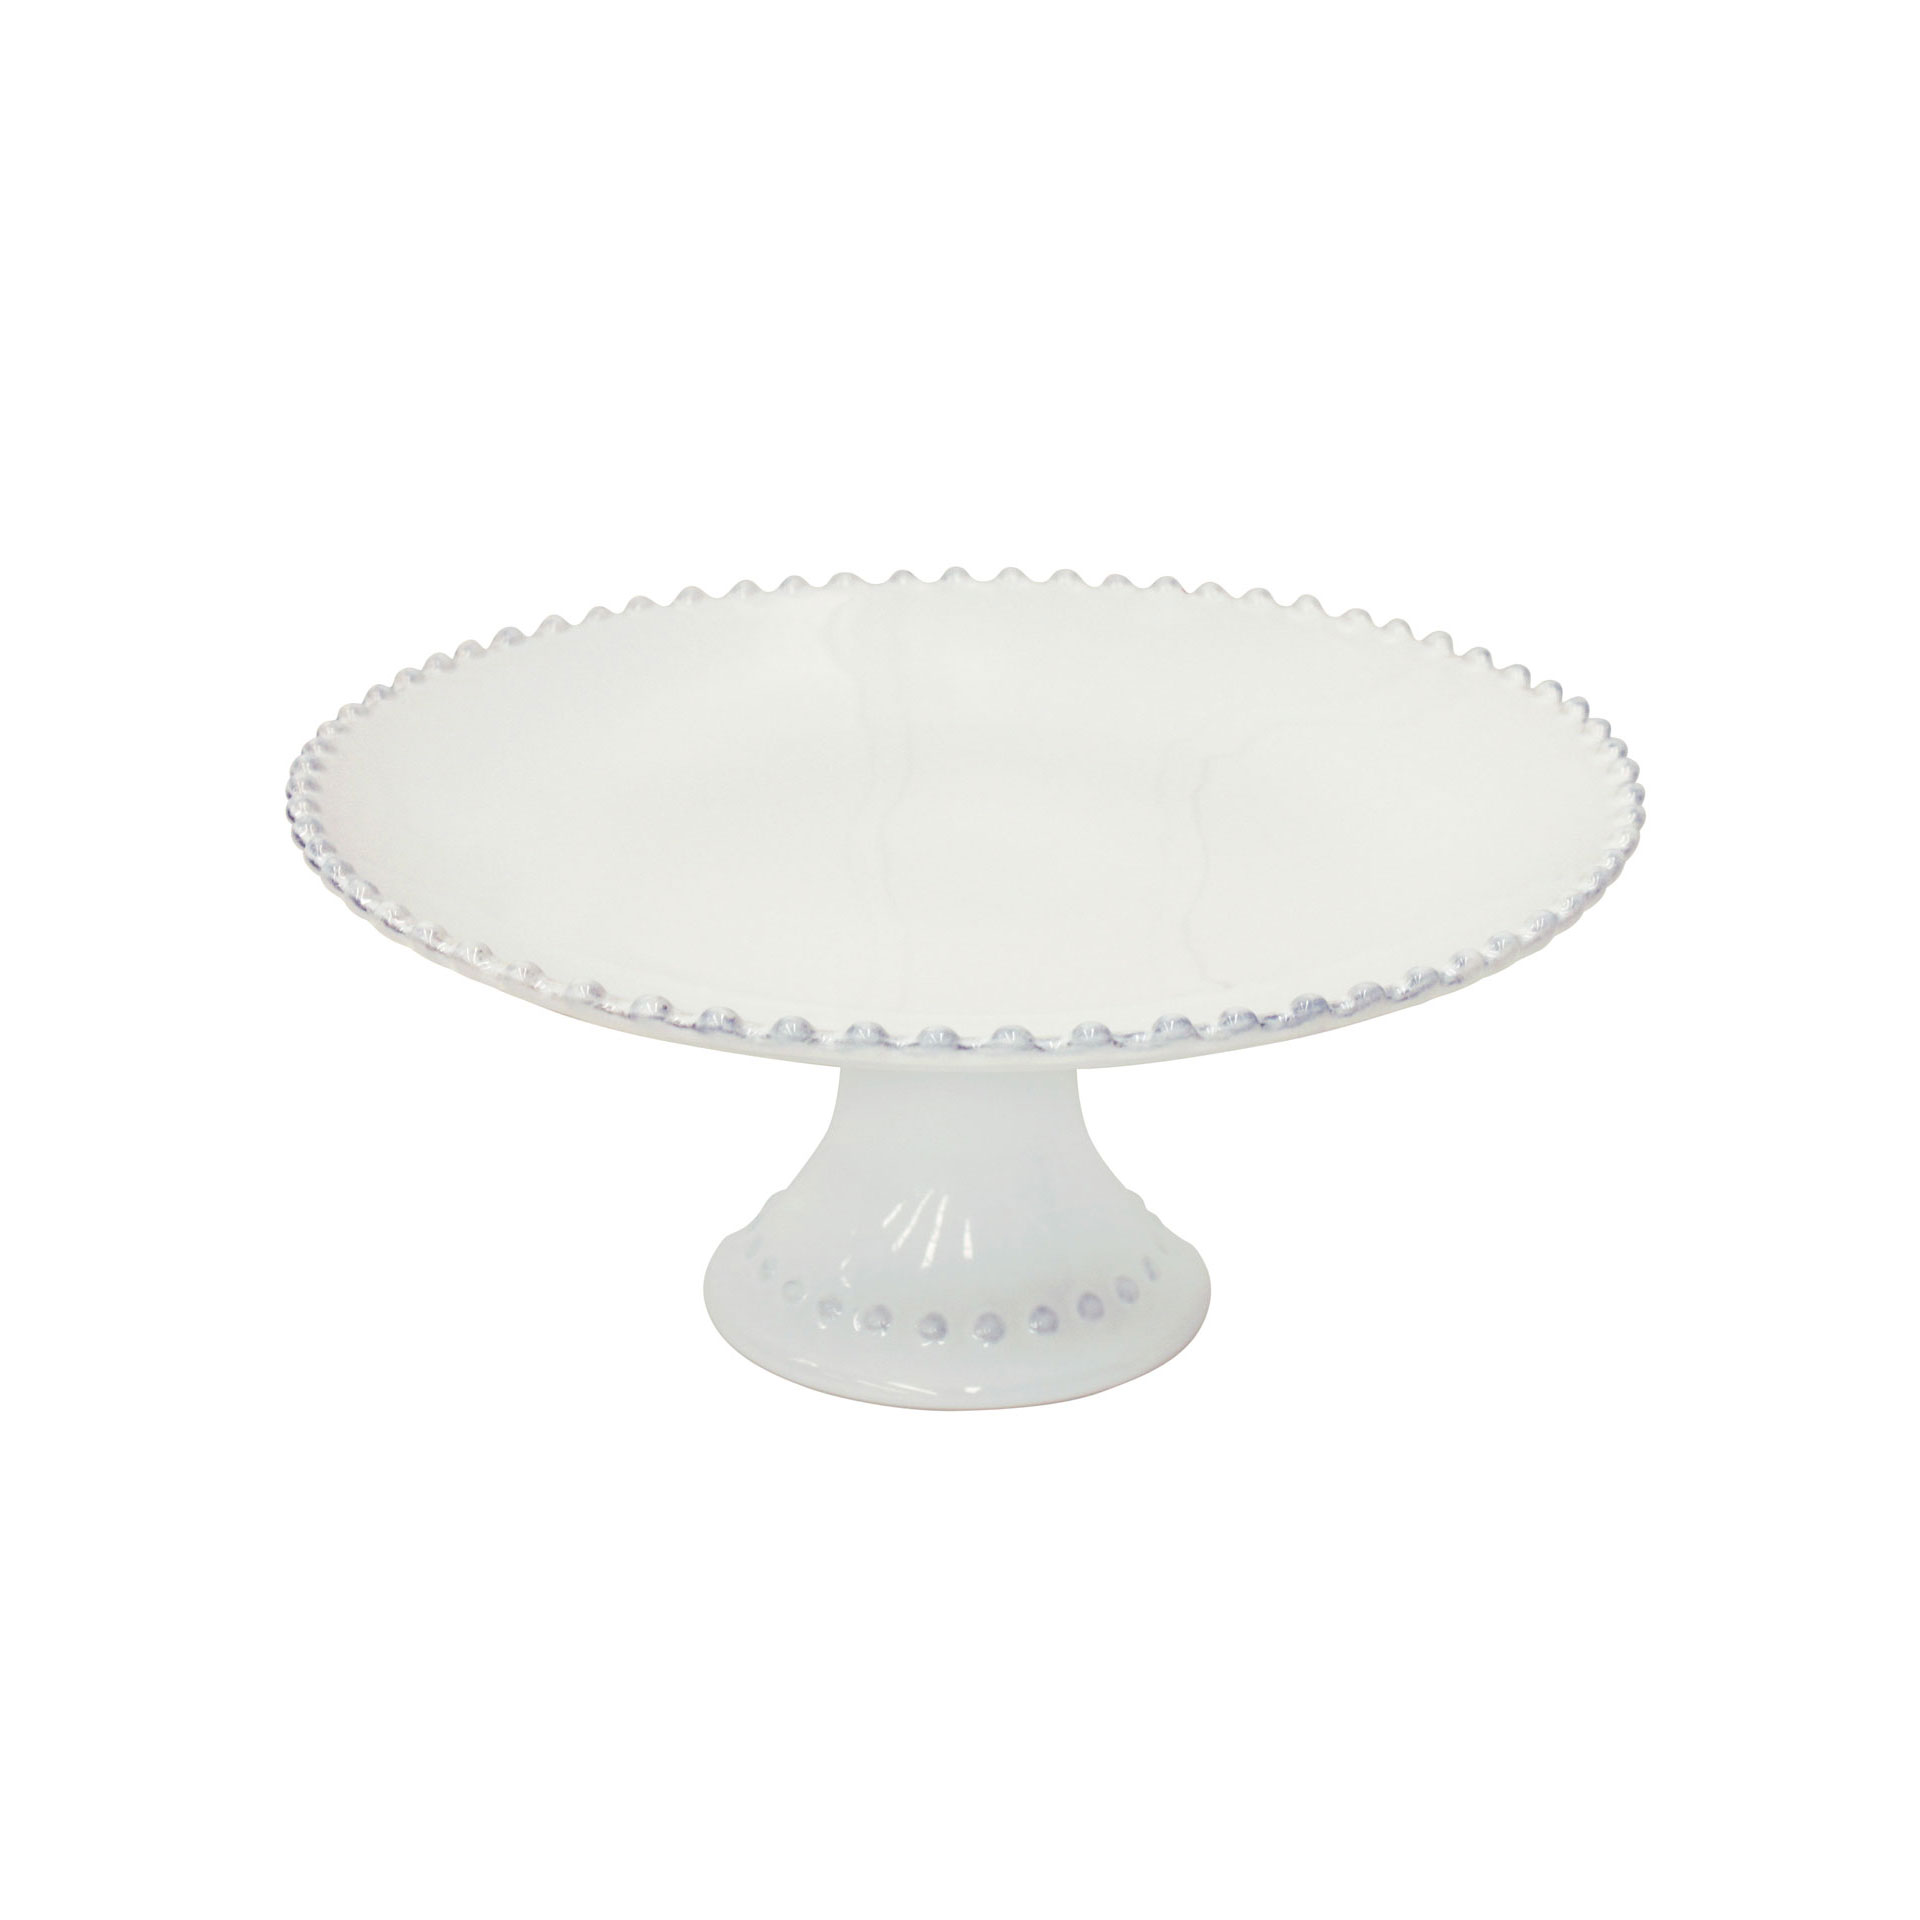 PEARL WHITE FOOTED PLATE